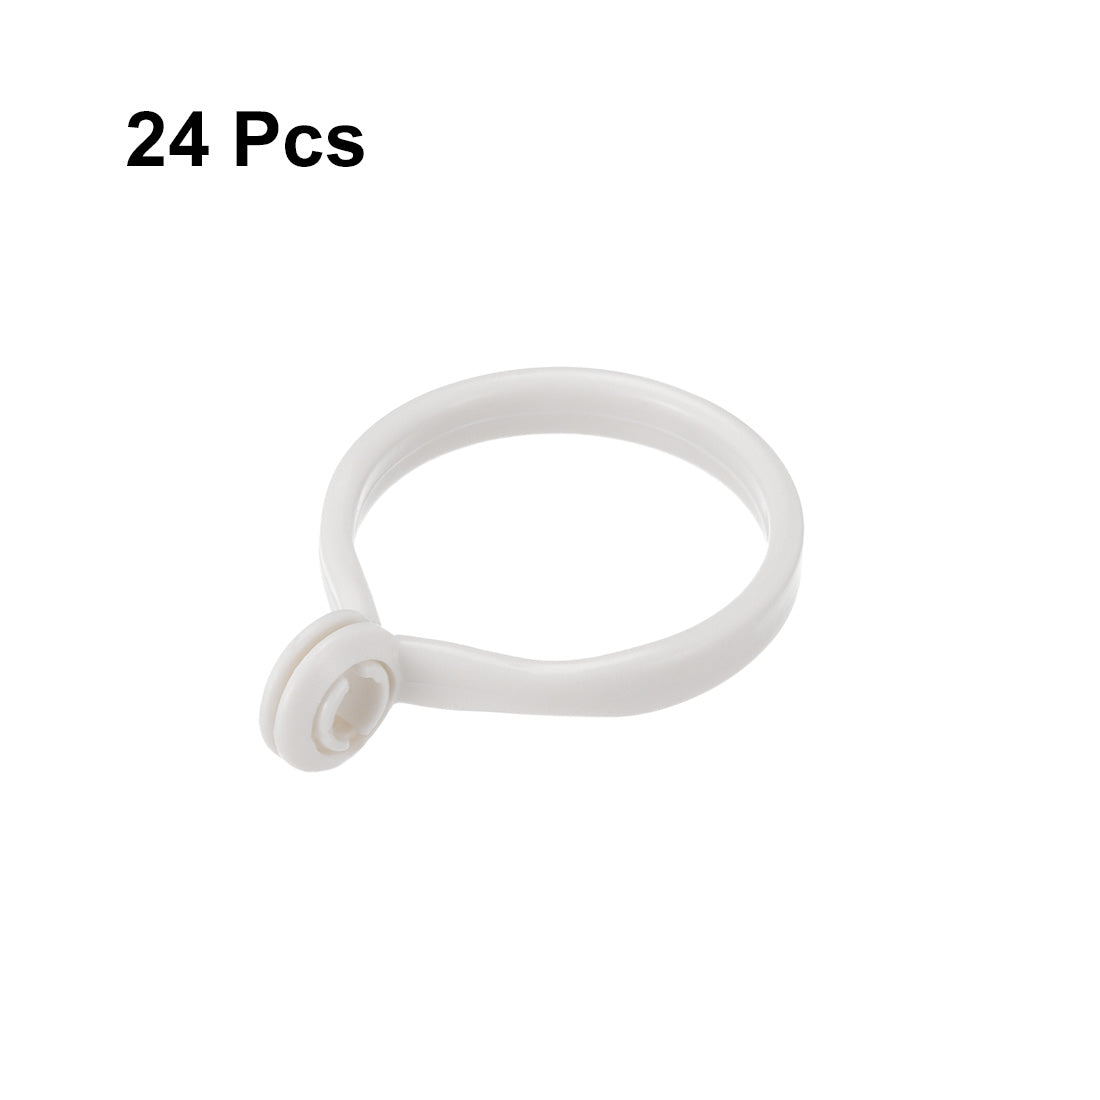 uxcell Uxcell Curtain Rings Plastic Drapery Ring with Snap Closure for Curtain Rods White 24 Pcs